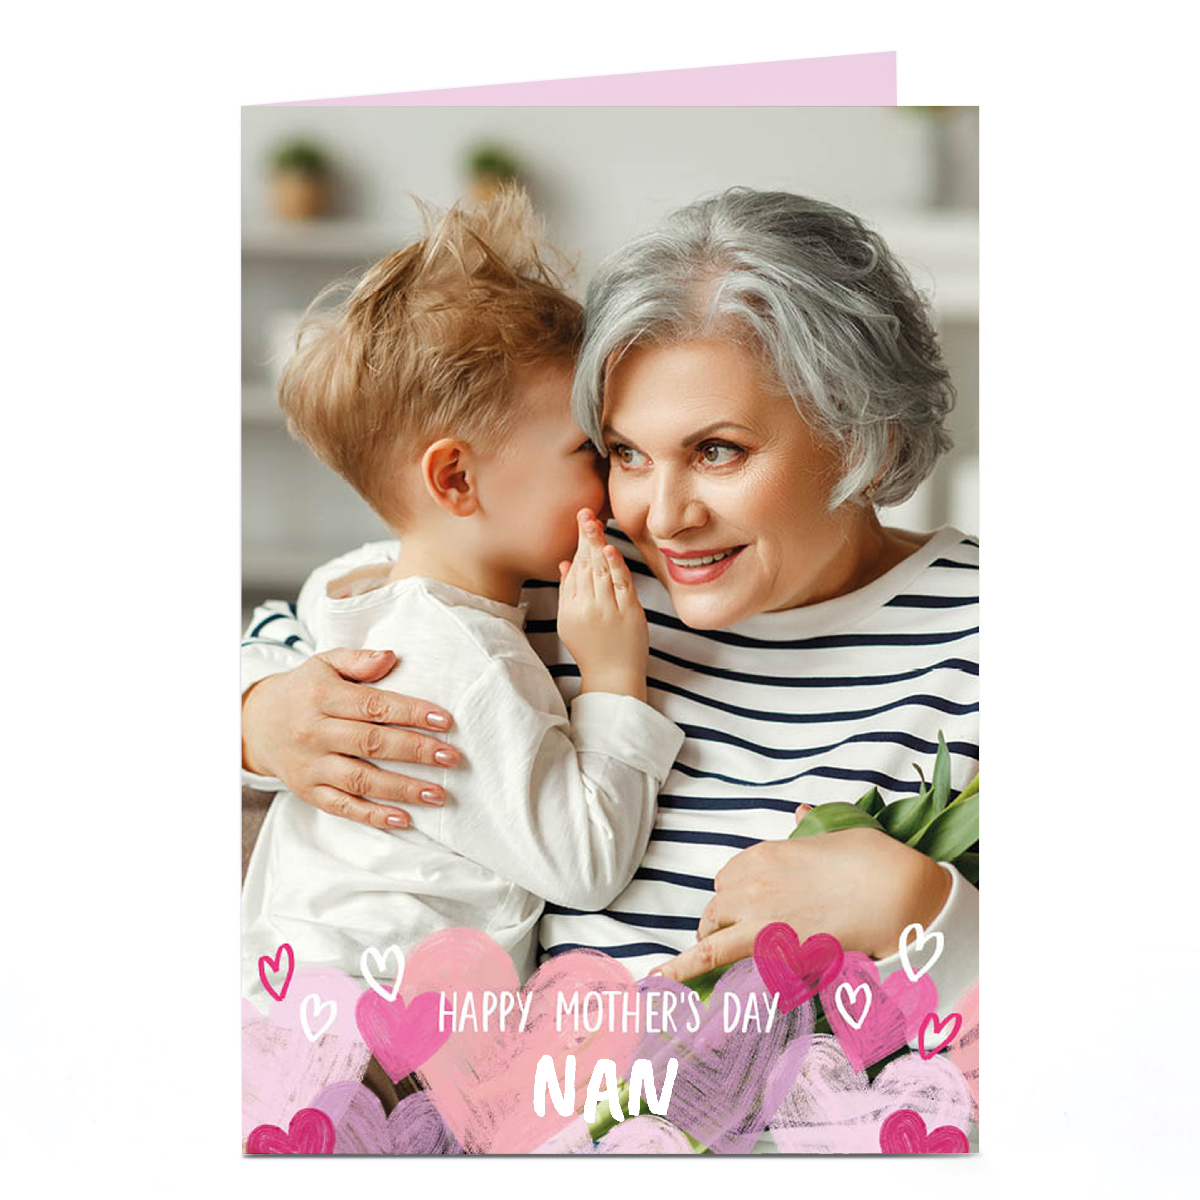 Personalised Mother's Day Card - Full photo with hearts below - Nan